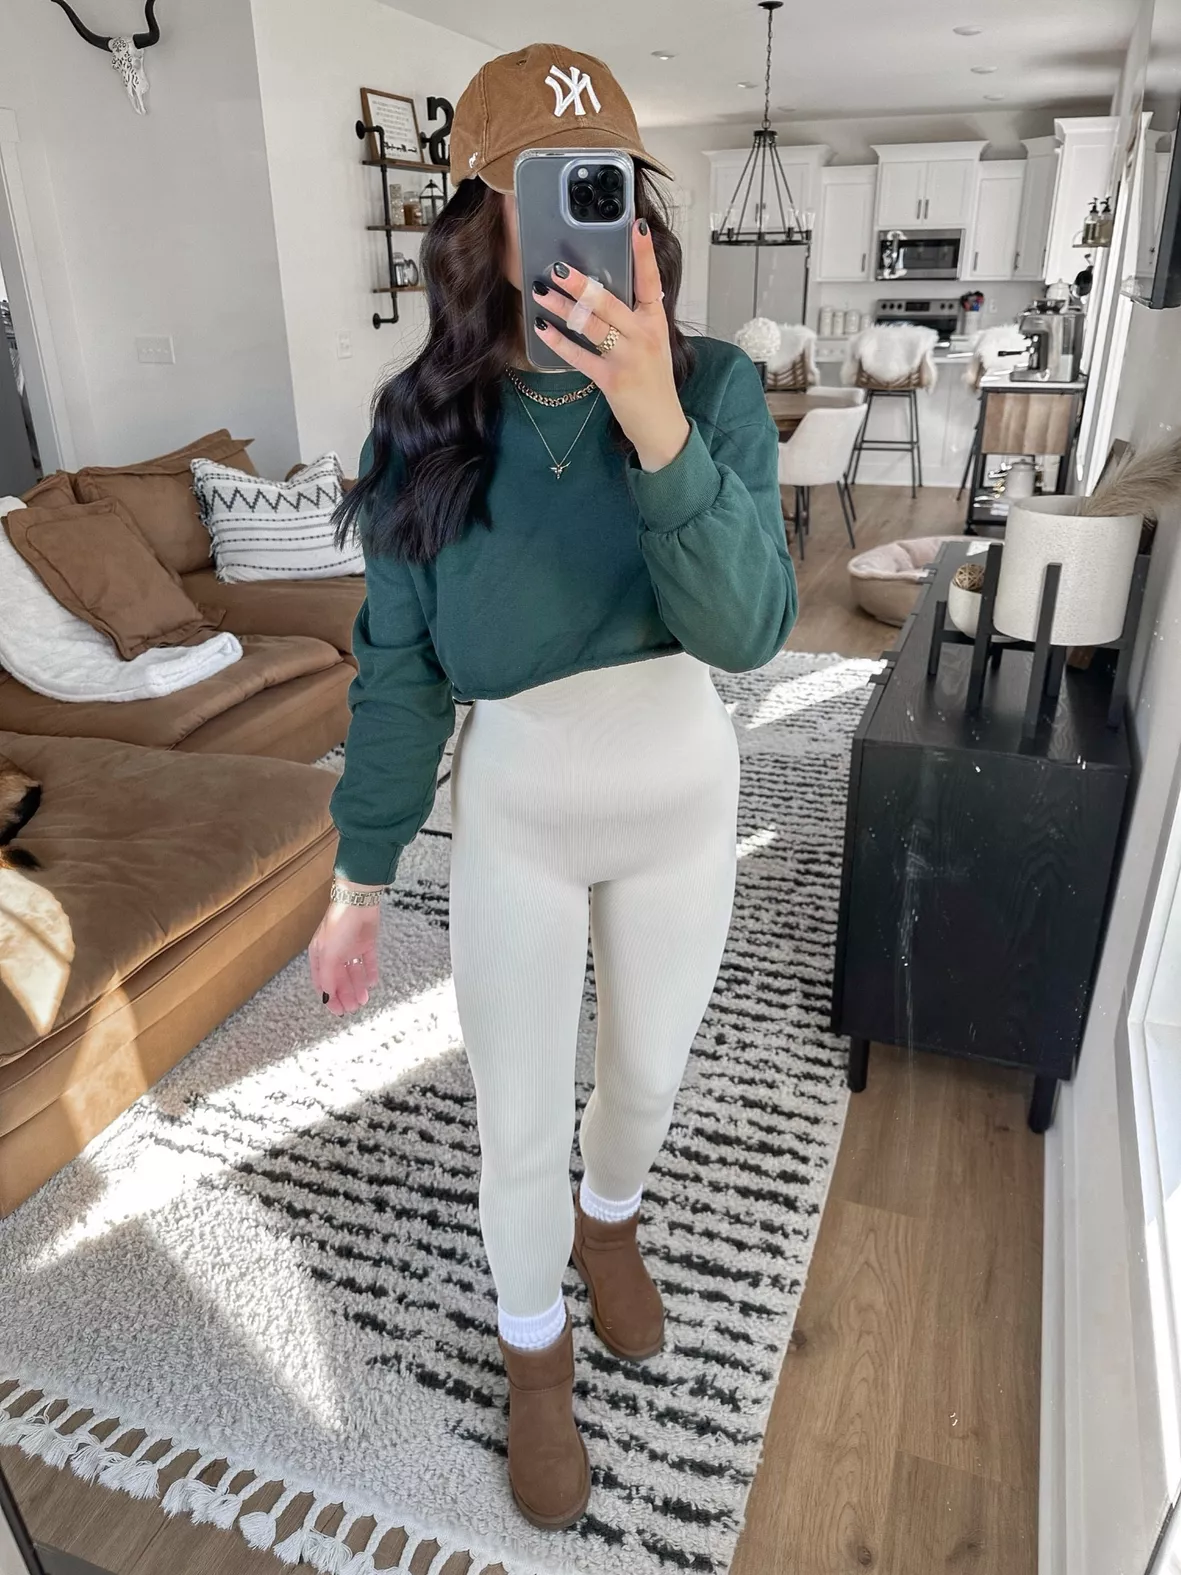 COMFY bottle green ribbed leggings by